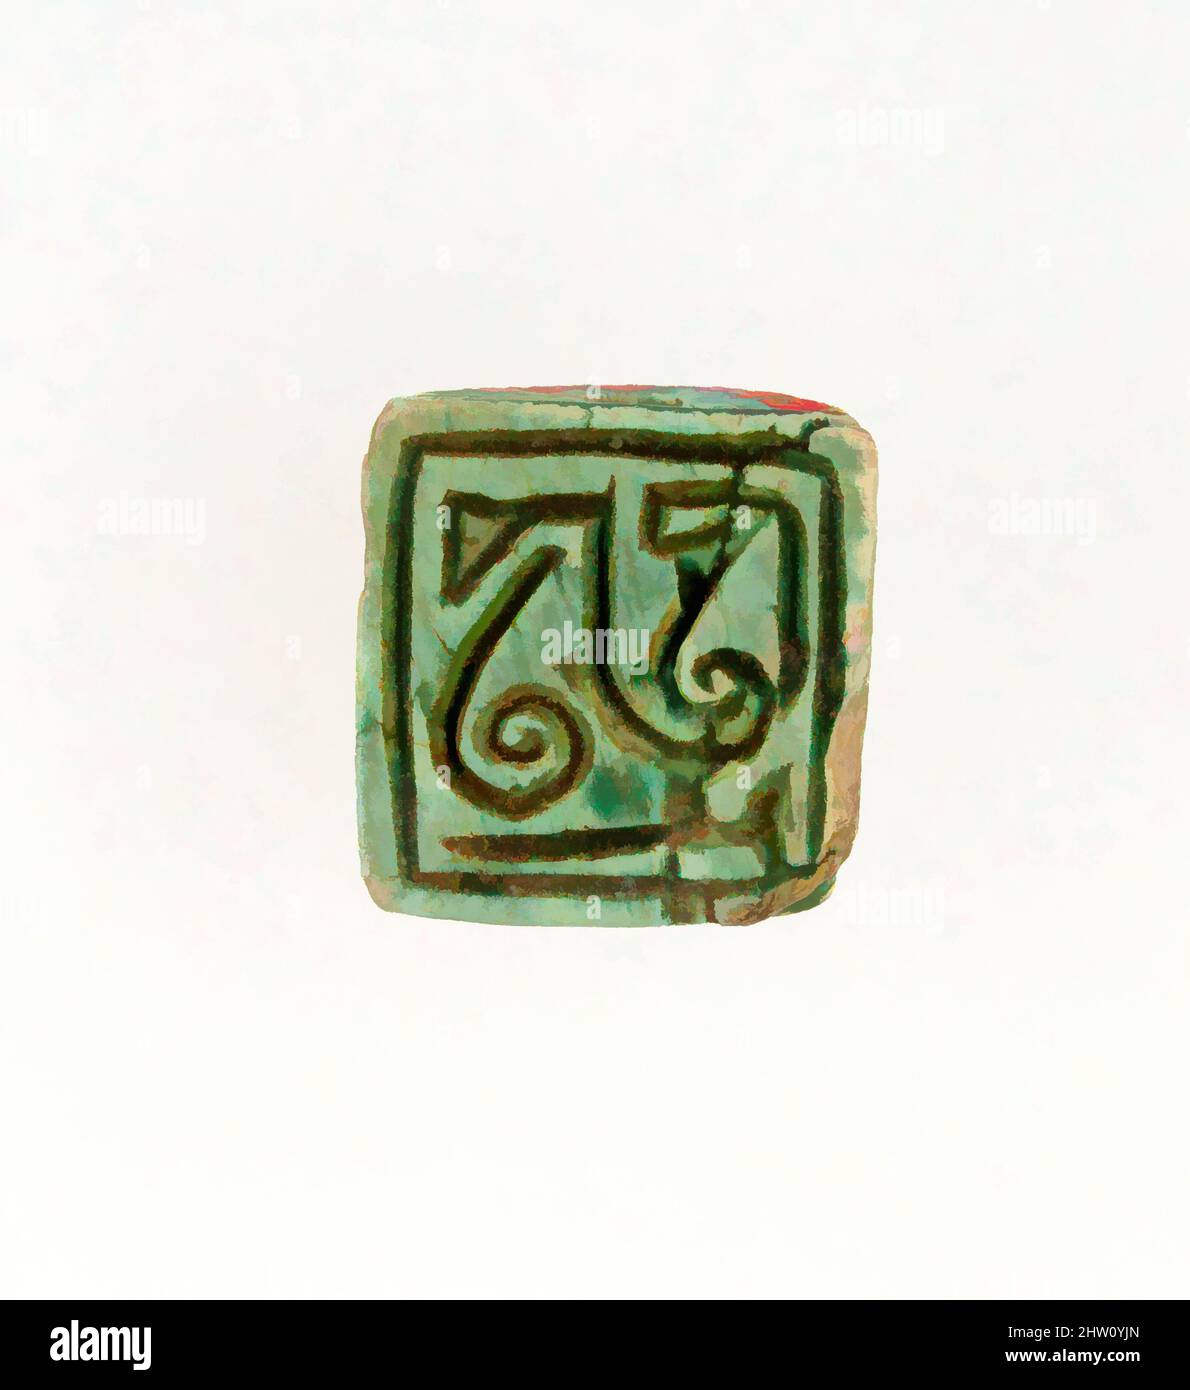 https://c8.alamy.com/comp/2HW0YJN/art-inspired-by-half-cylinder-stamp-seal-new-kingdom-dynasty-18-ca-15251504-bc-from-egypt-pottery-h-12-cm-12-in-classic-works-modernized-by-artotop-with-a-splash-of-modernity-shapes-color-and-value-eye-catching-visual-impact-on-art-emotions-through-freedom-of-artworks-in-a-contemporary-way-a-timeless-message-pursuing-a-wildly-creative-new-direction-artists-turning-to-the-digital-medium-and-creating-the-artotop-nft-2HW0YJN.jpg